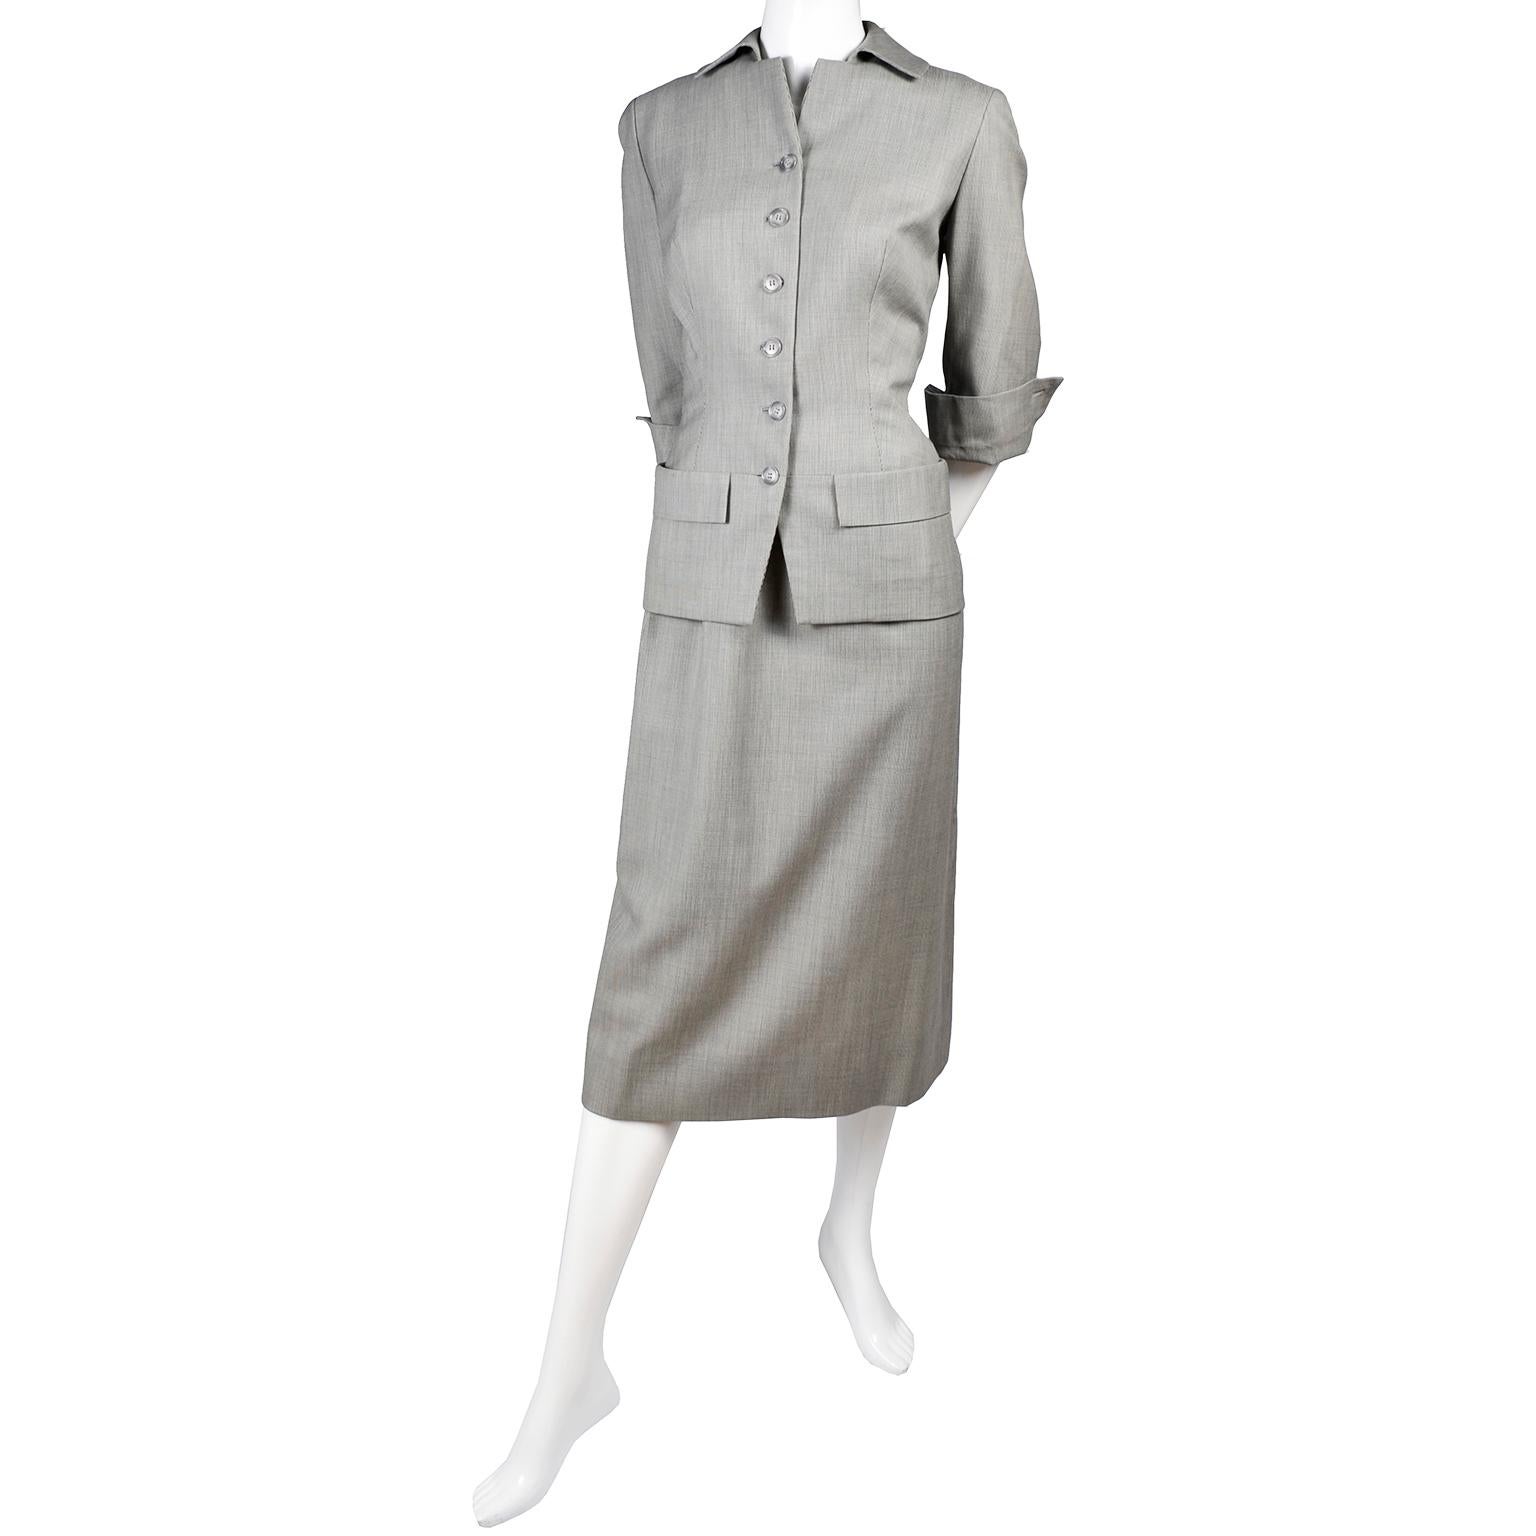 1950's Irene Lentz exclusively for Gunther Jaeckel 2 piece blazer and skirt suit in a lovely gray lightweight wool, lined in a luxurious pink silk.  The jacket of the suit buttons up the front, has two flap pockets, 3/4 length sleeves with upturned